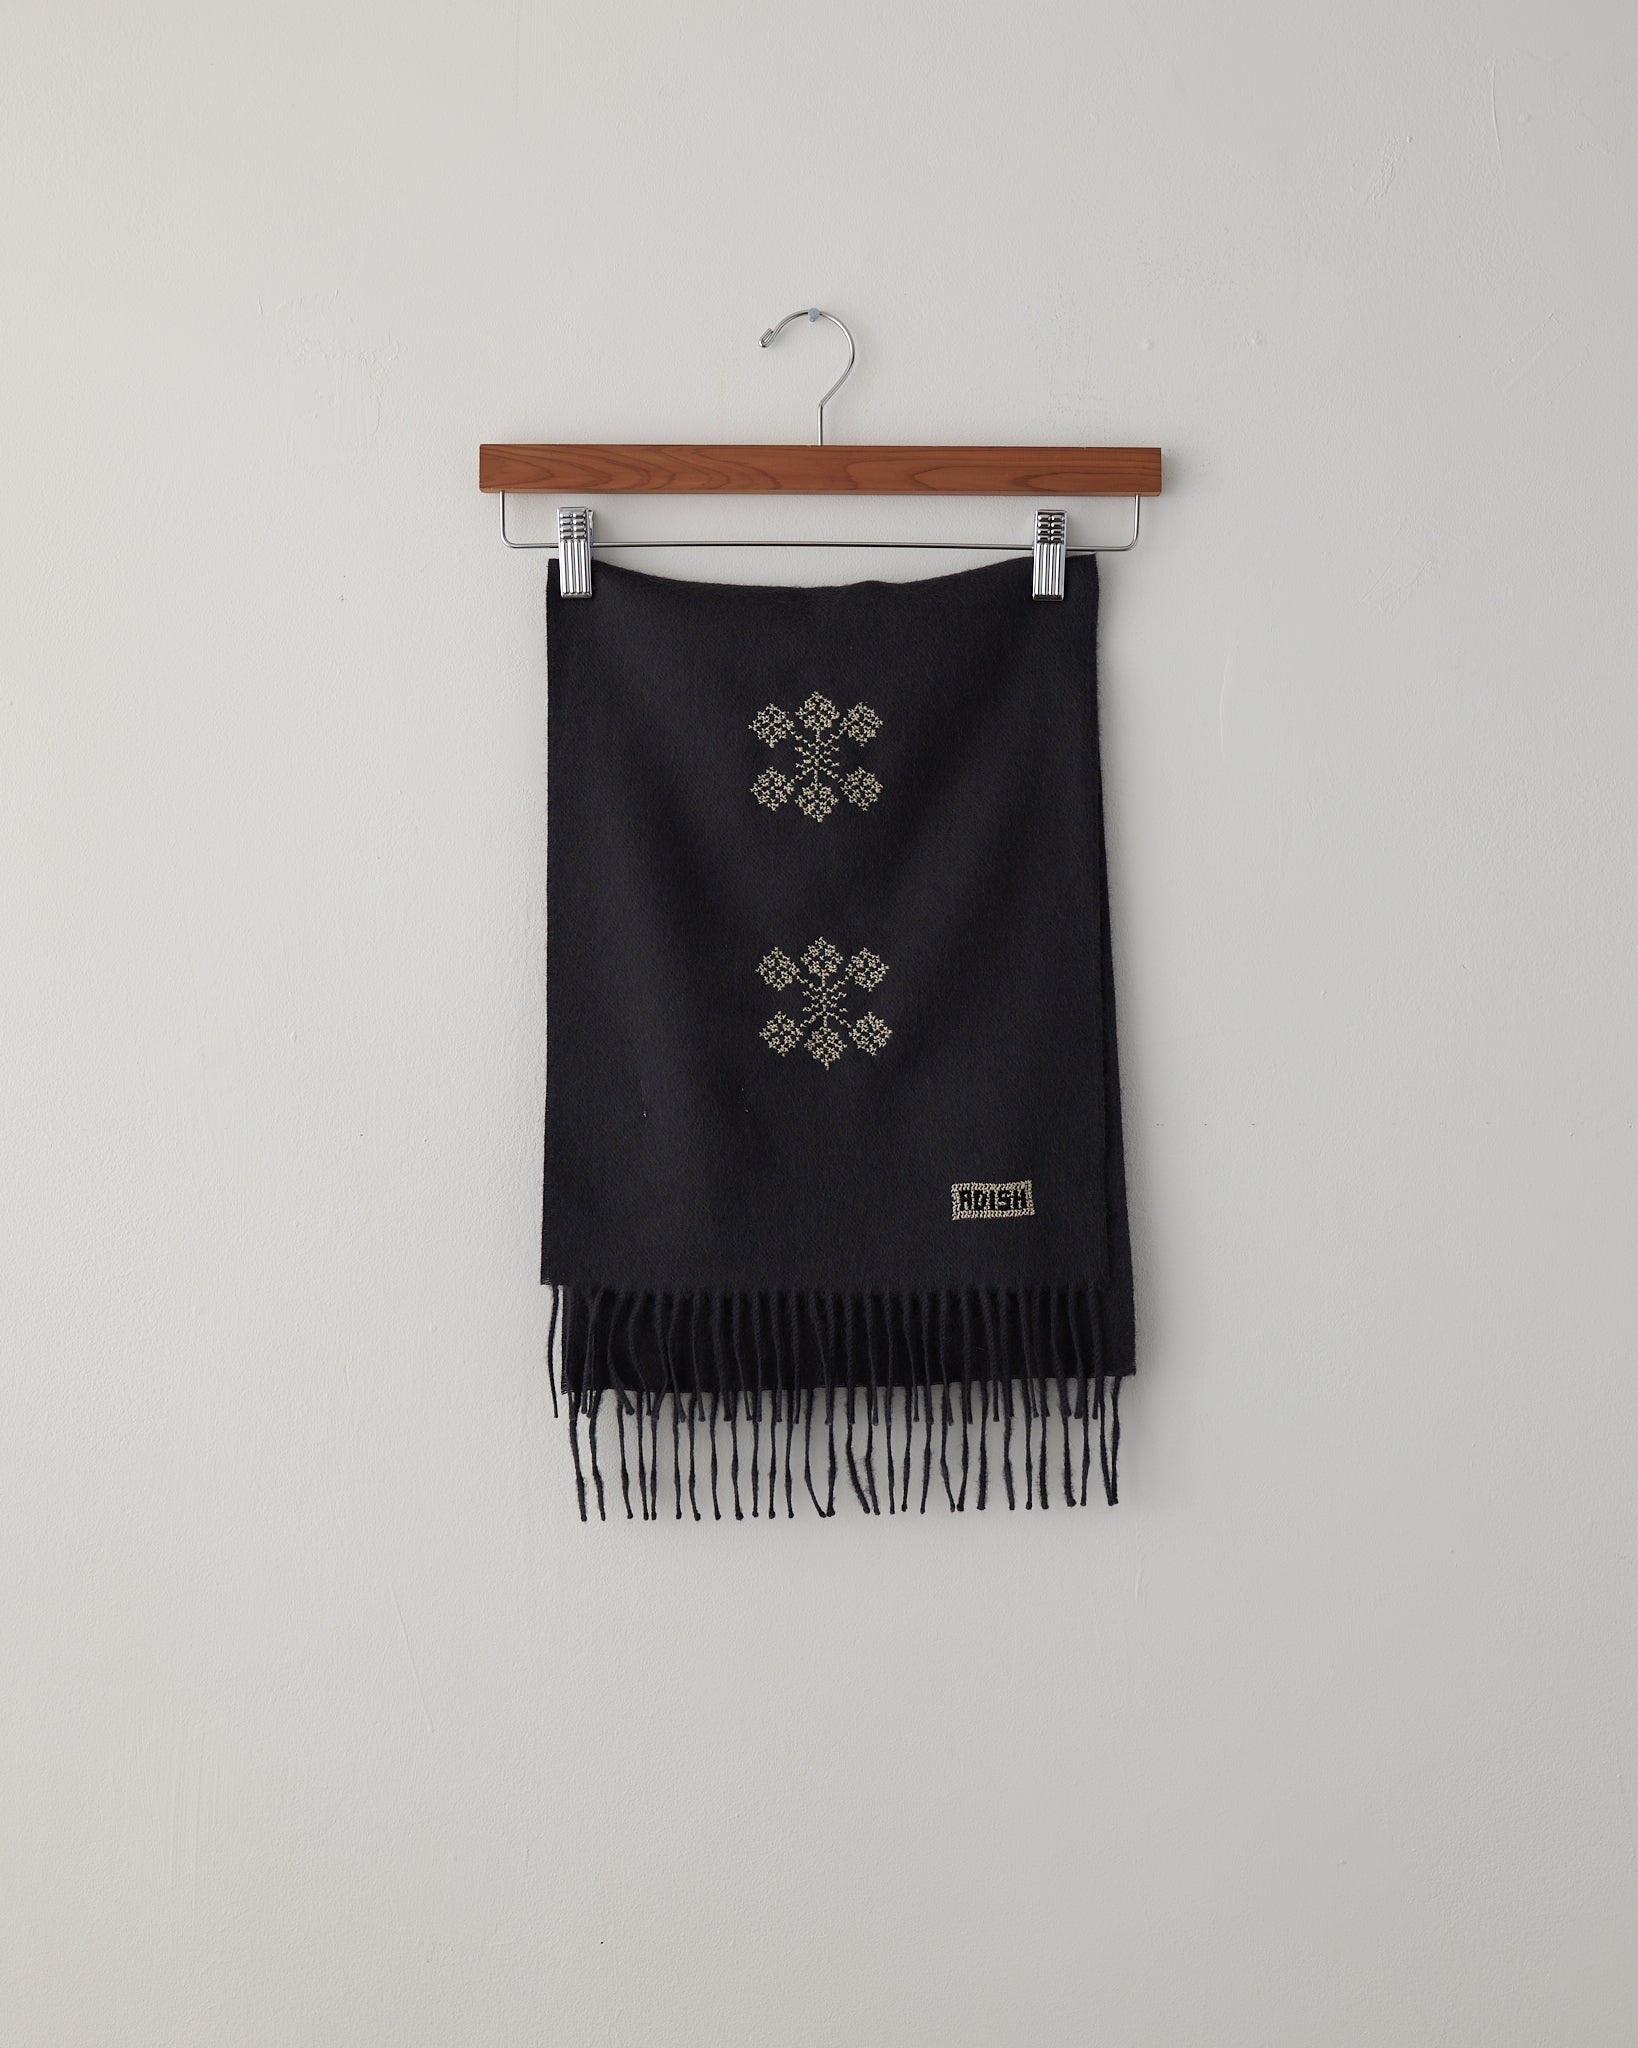 The Inoue Brothers Up-Cycled Alpaca Scarf